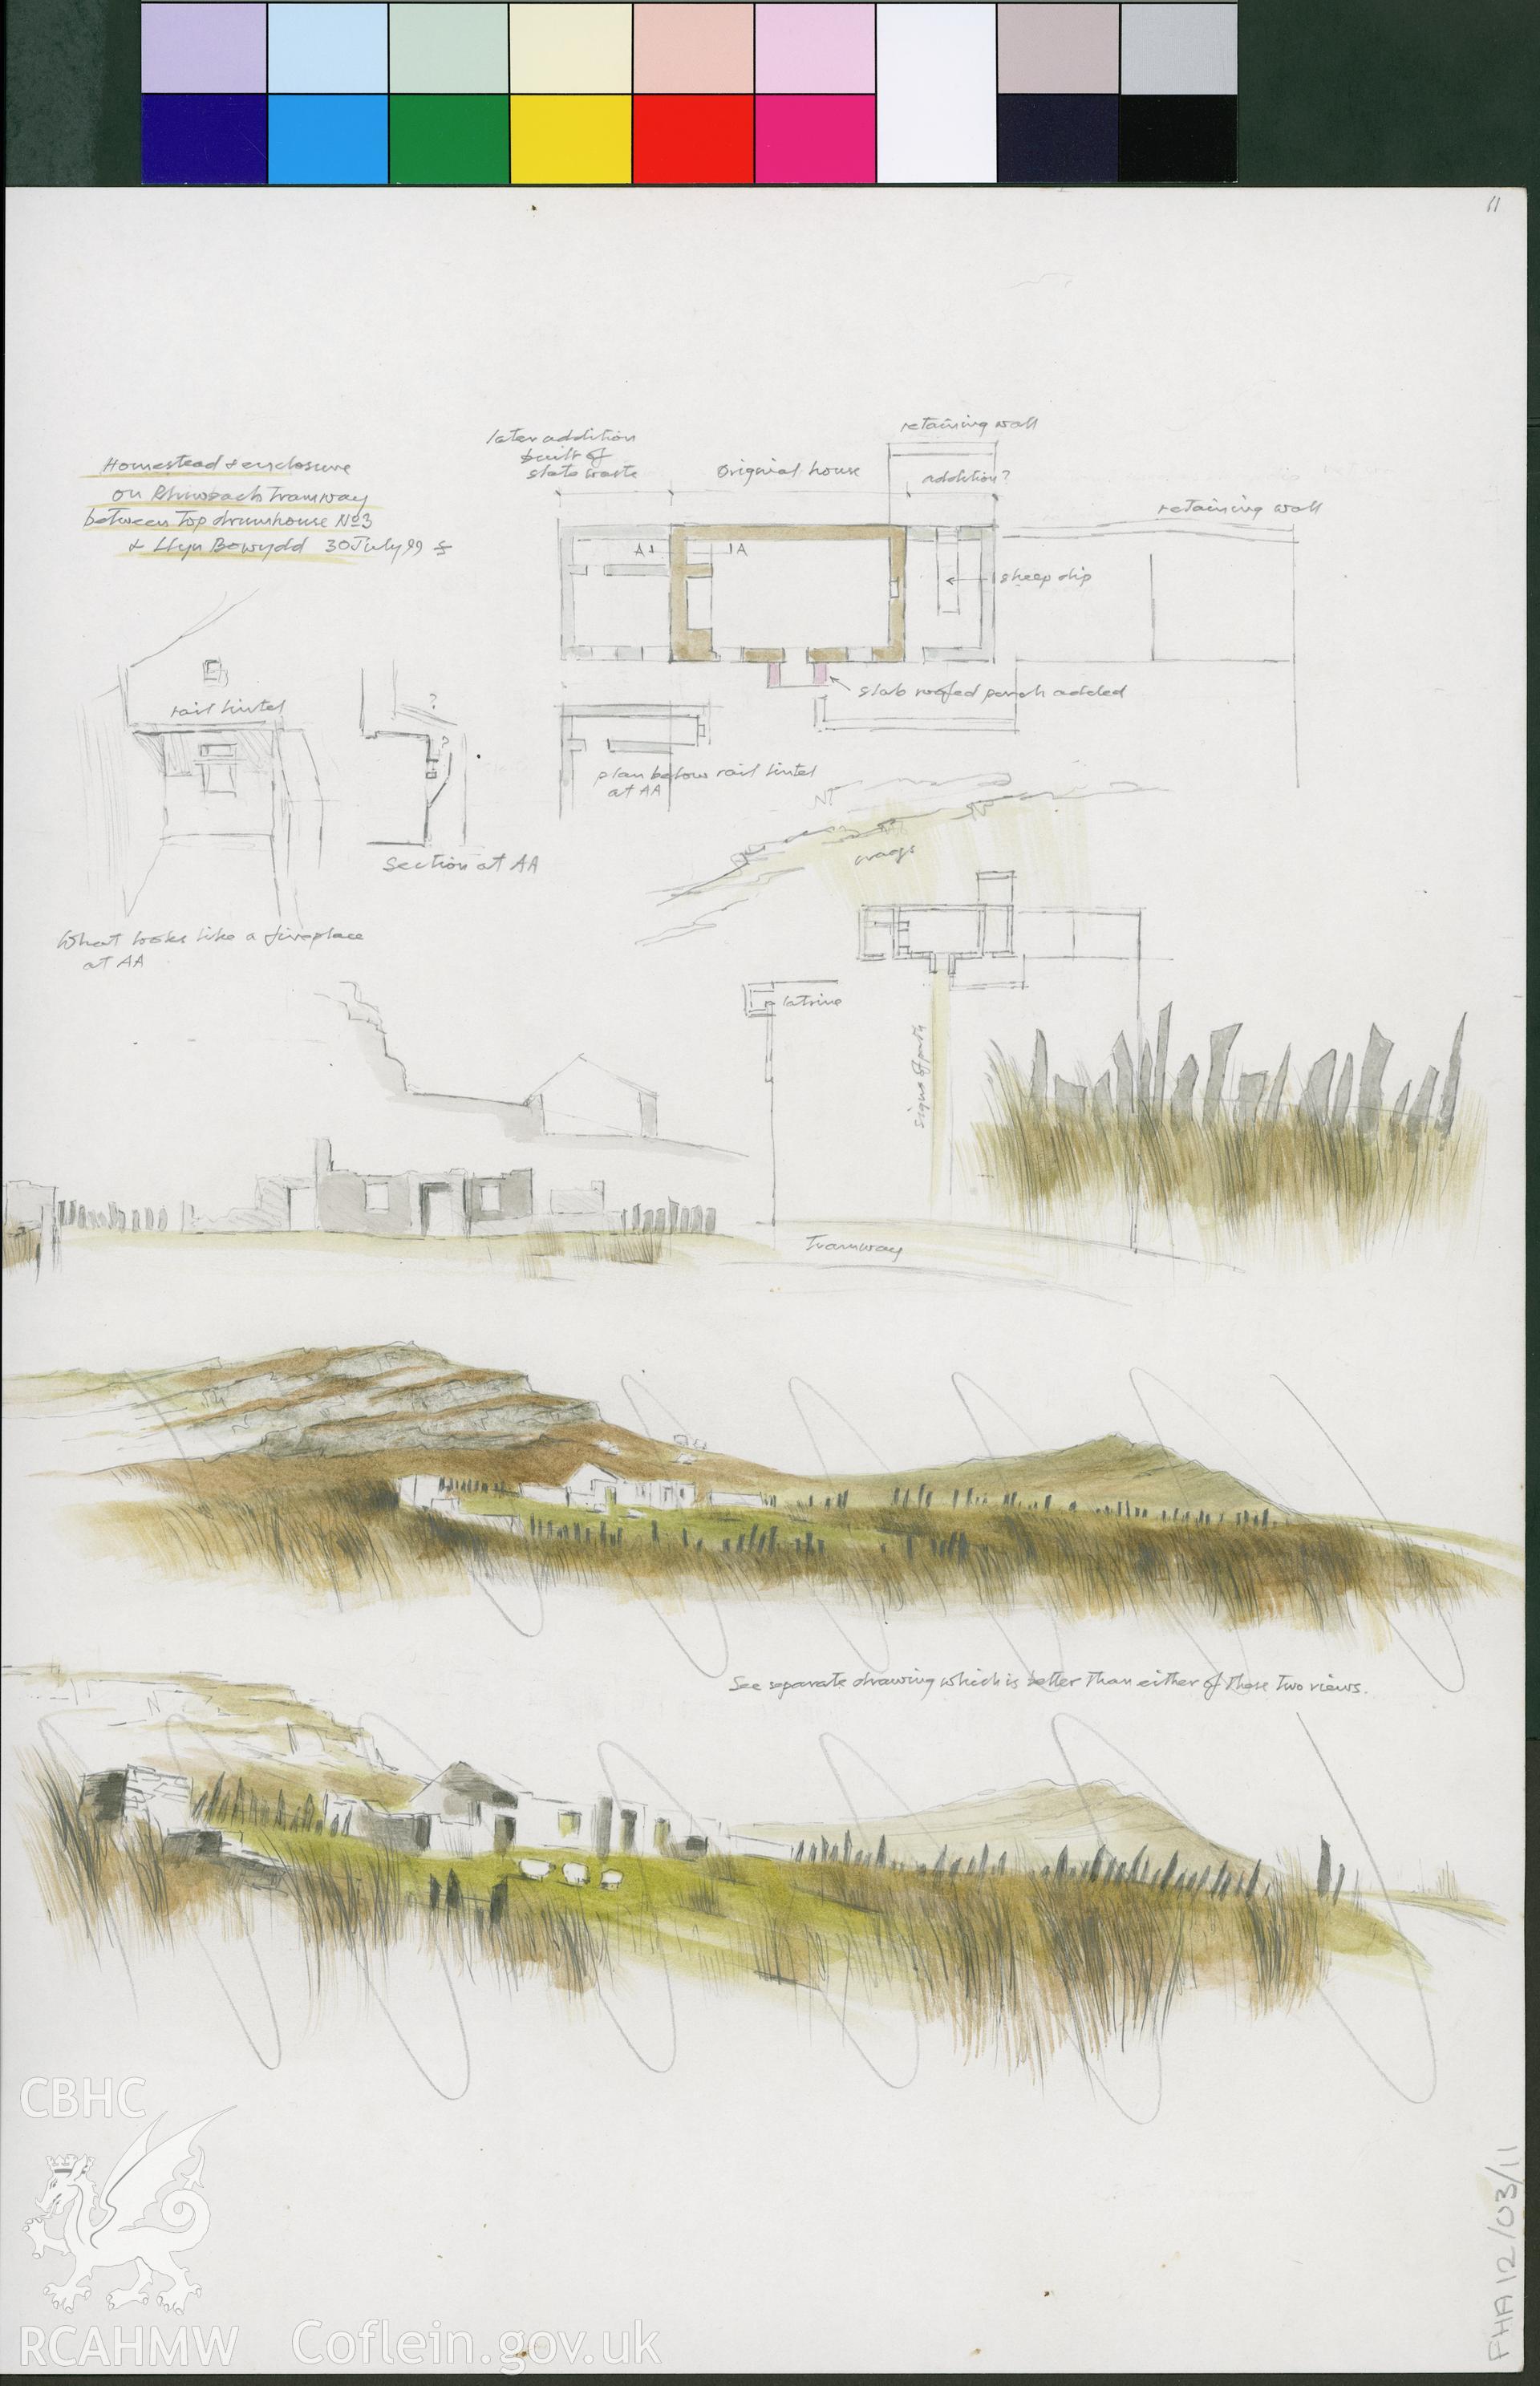 Preliminary sketches showing homestead at Rhiwbach Tramway, produced by Falcon Hildred, July 1999.